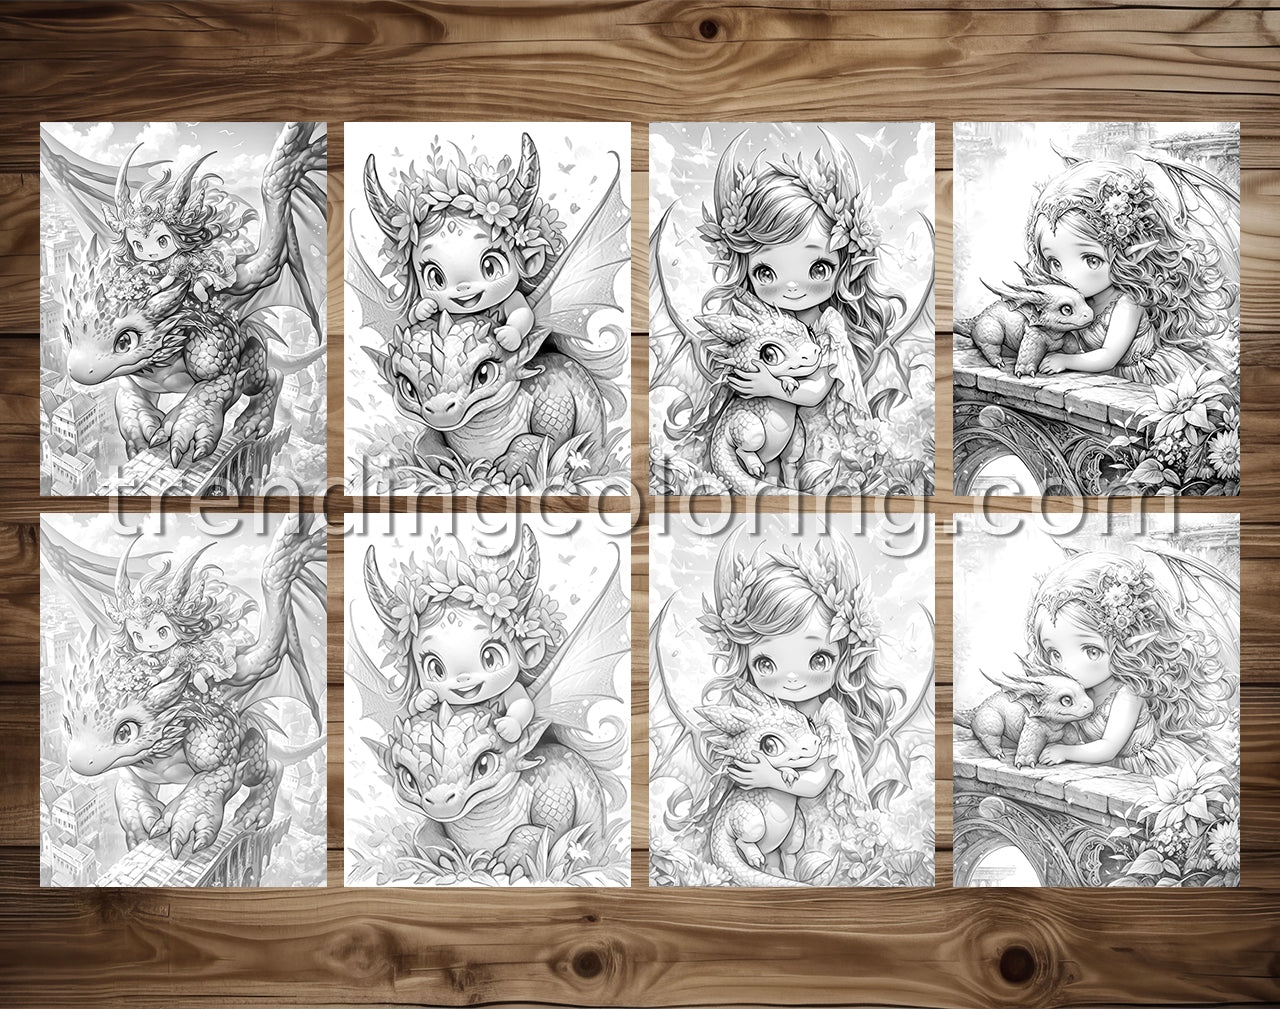 35 Fairies & Dragons 2 Grayscale Coloring Pages - Instant Download - Printable